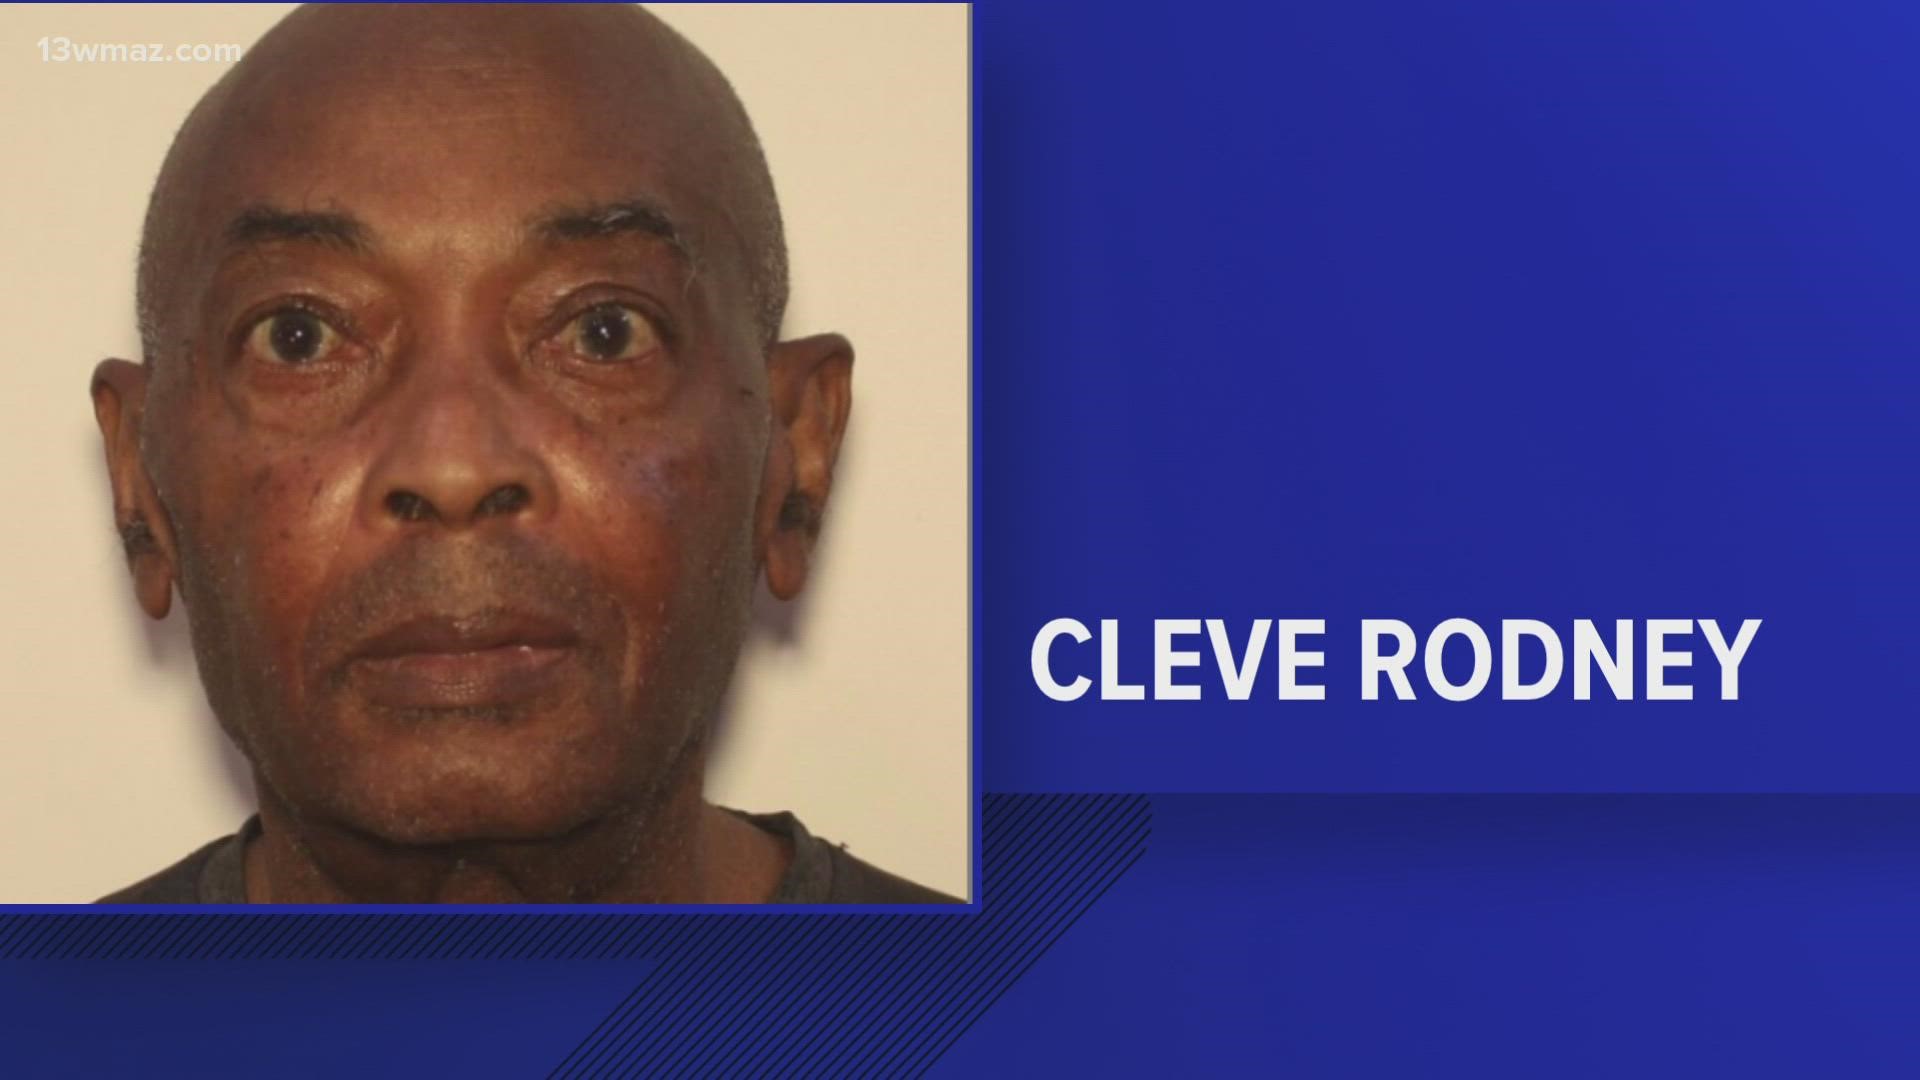 Cleve Rodney was last seen leaving his home at 1294 Glendale Avenue at around 10:30 a.m.